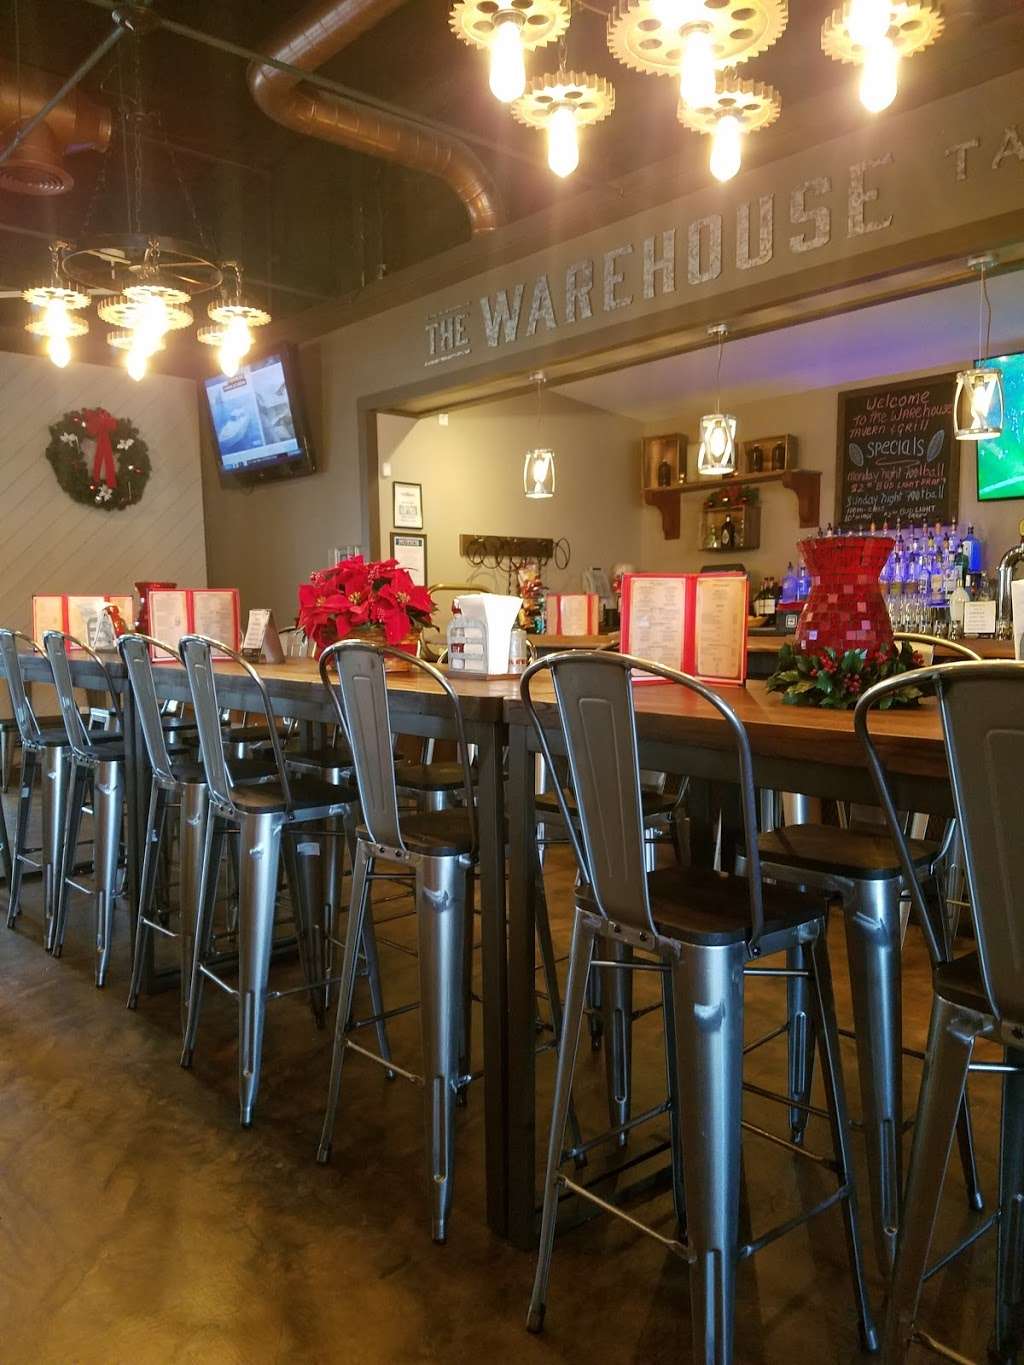 The Warehouse Tavern and Grill | 09735400137435, East Stroudsburg, PA 18302 | Phone: (570) 588-3300